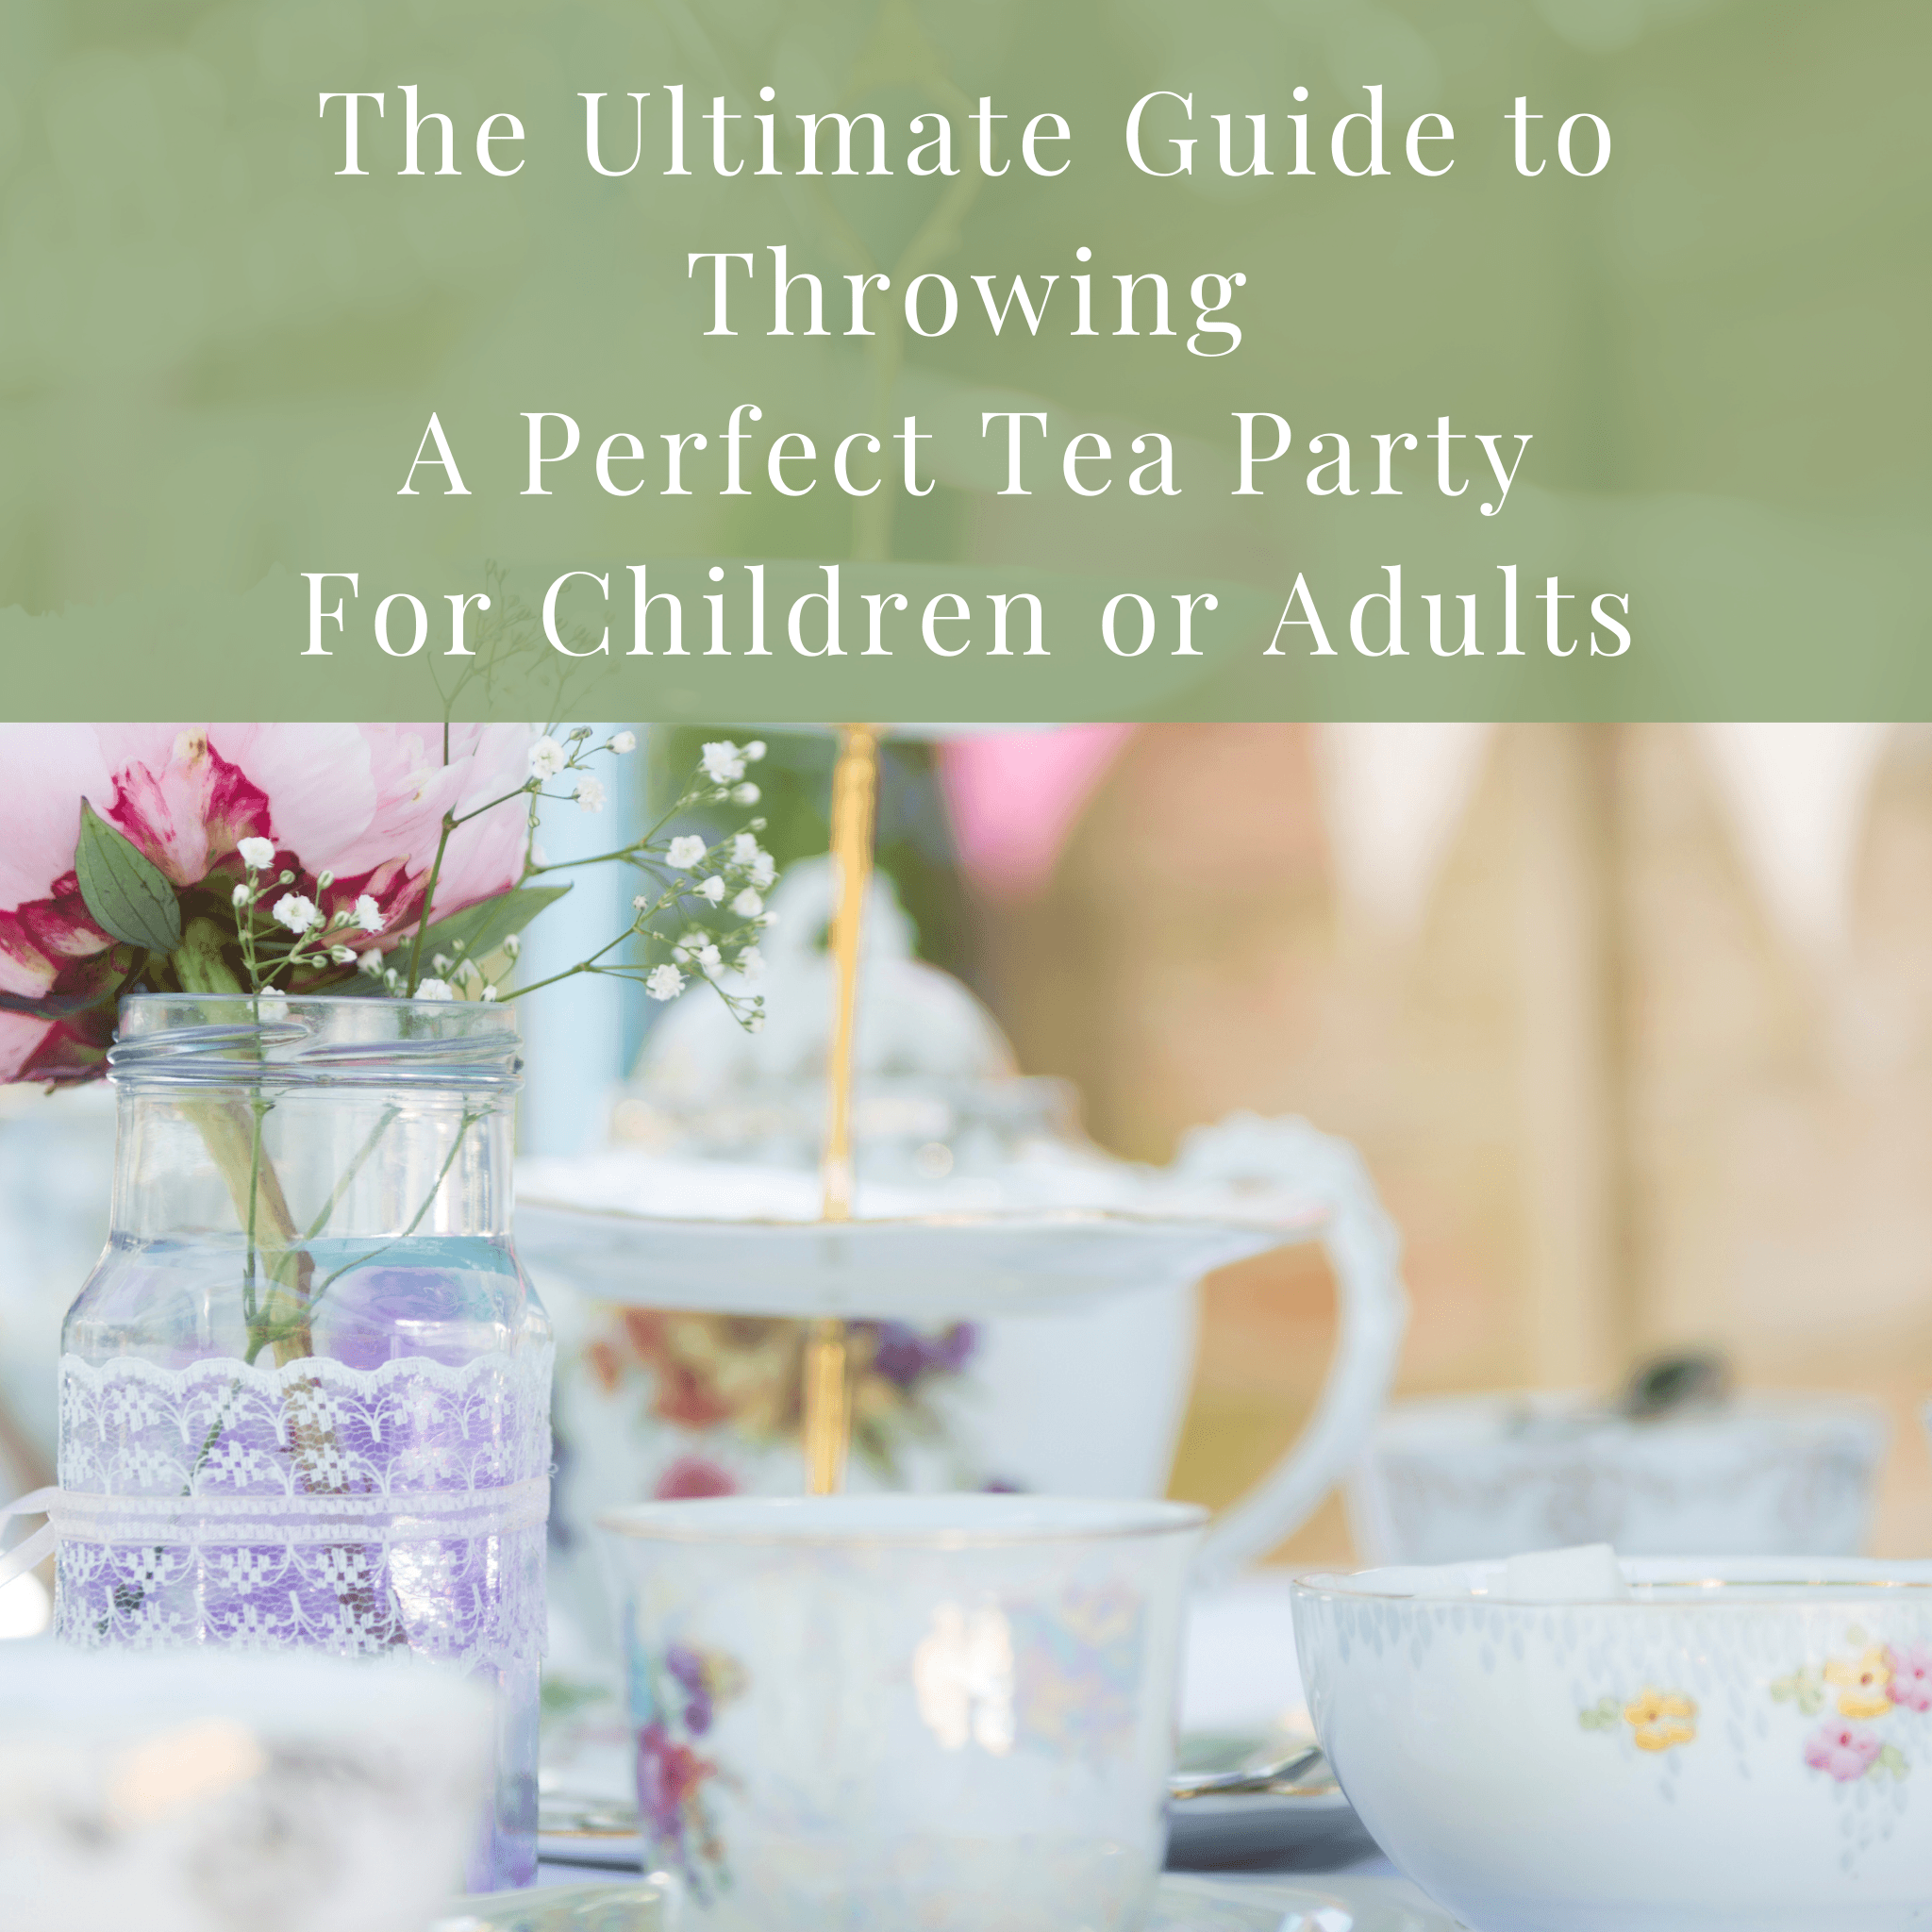 The Ultimate Guide for Throwing the Perfect Tea Party